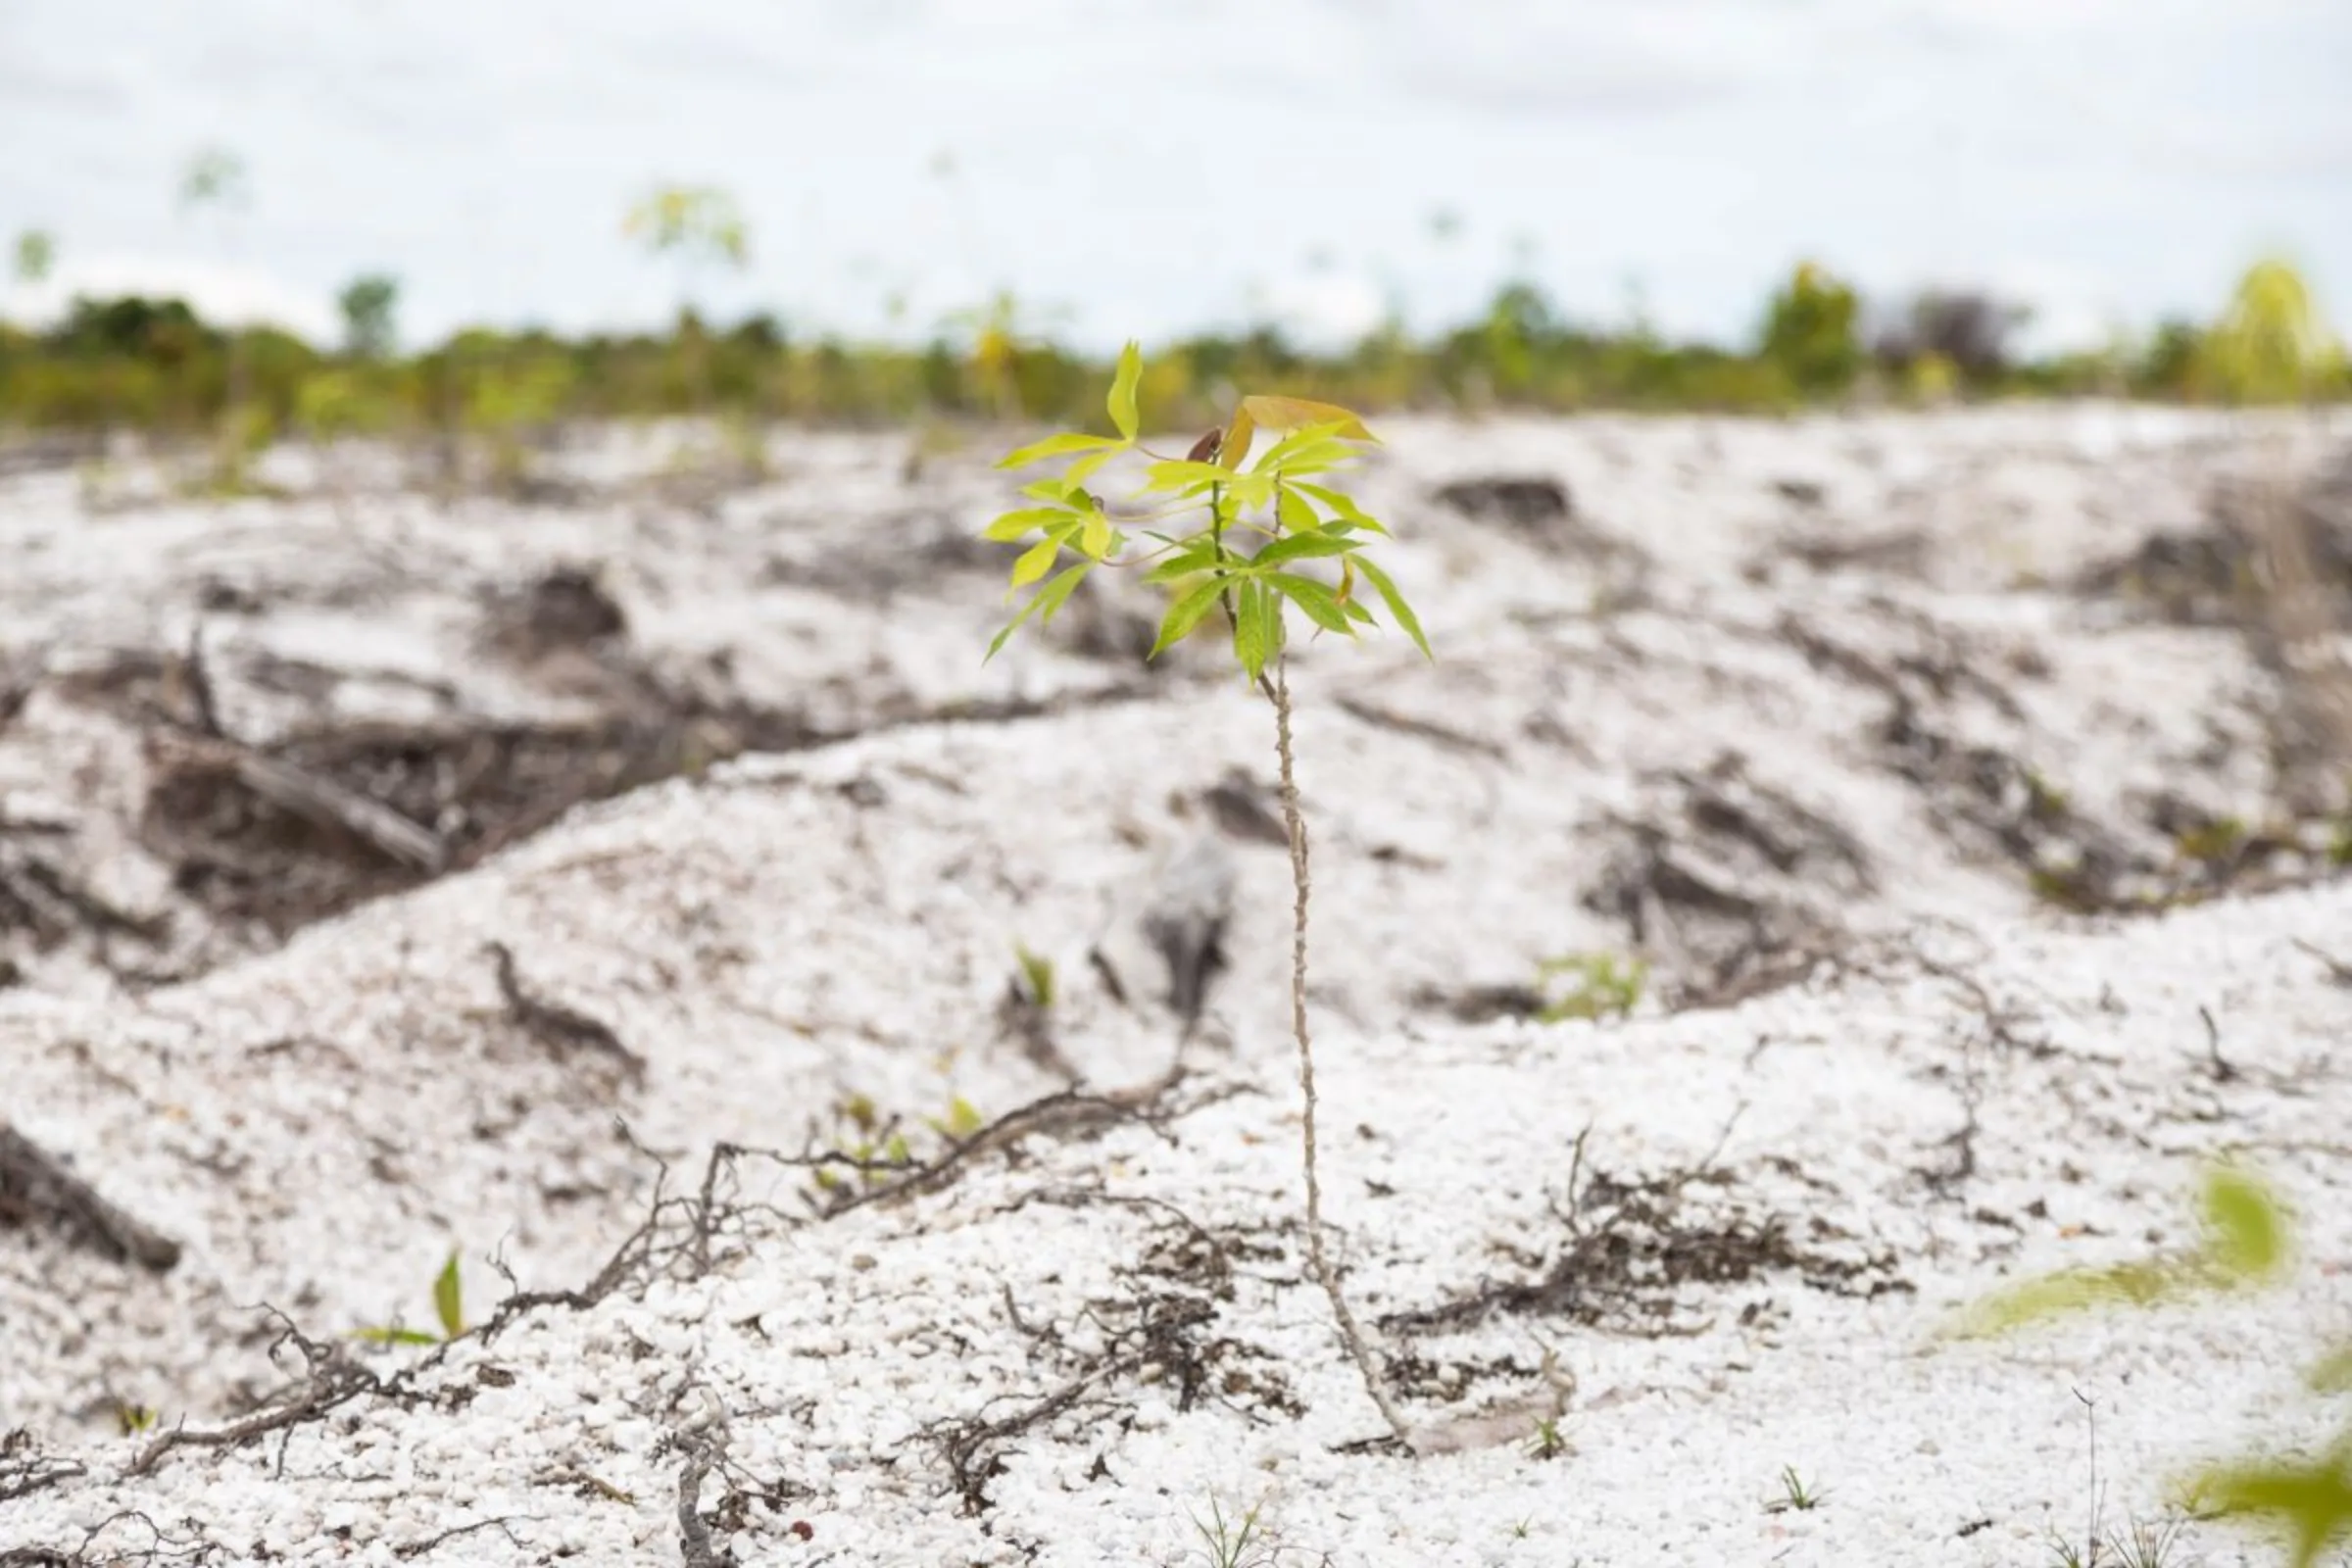 A stunted cassava plant in the food estate area in Central Kalimantan, Indonesia on June 20, 2023. The site has been left barren since the project stopped. Thomson Reuters Foundation/Irene Barlian